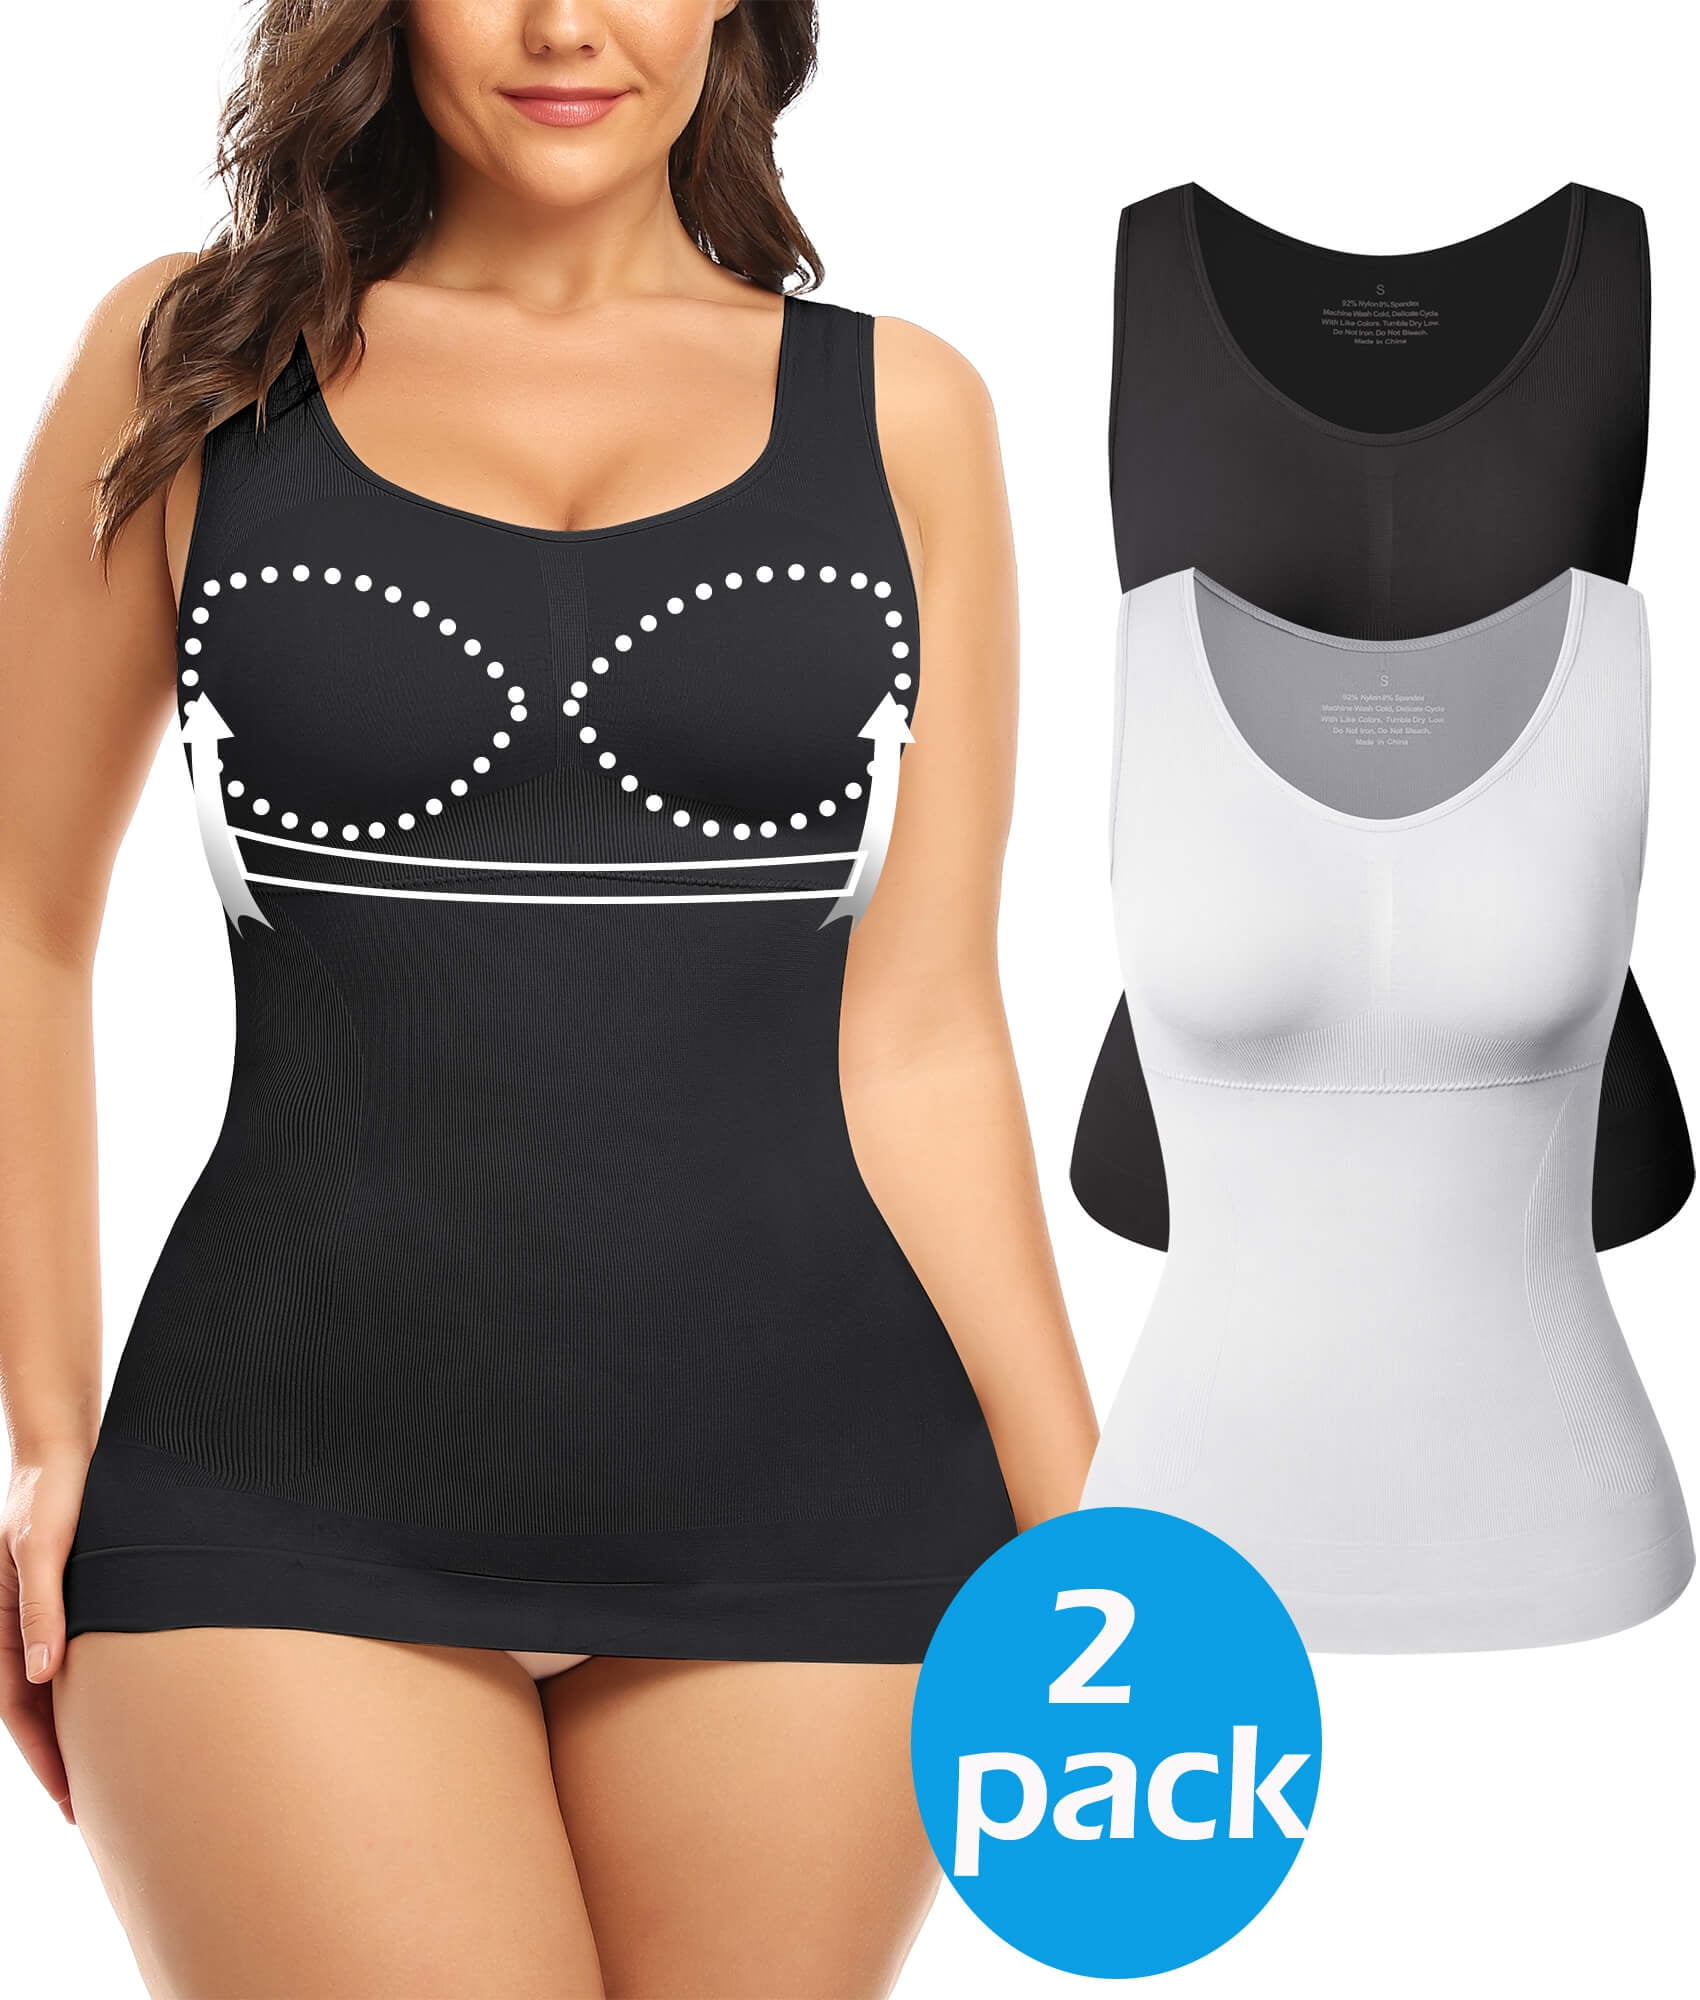 Buy Women's Cami Shaper with Built in Bra Tummy Control Camisole